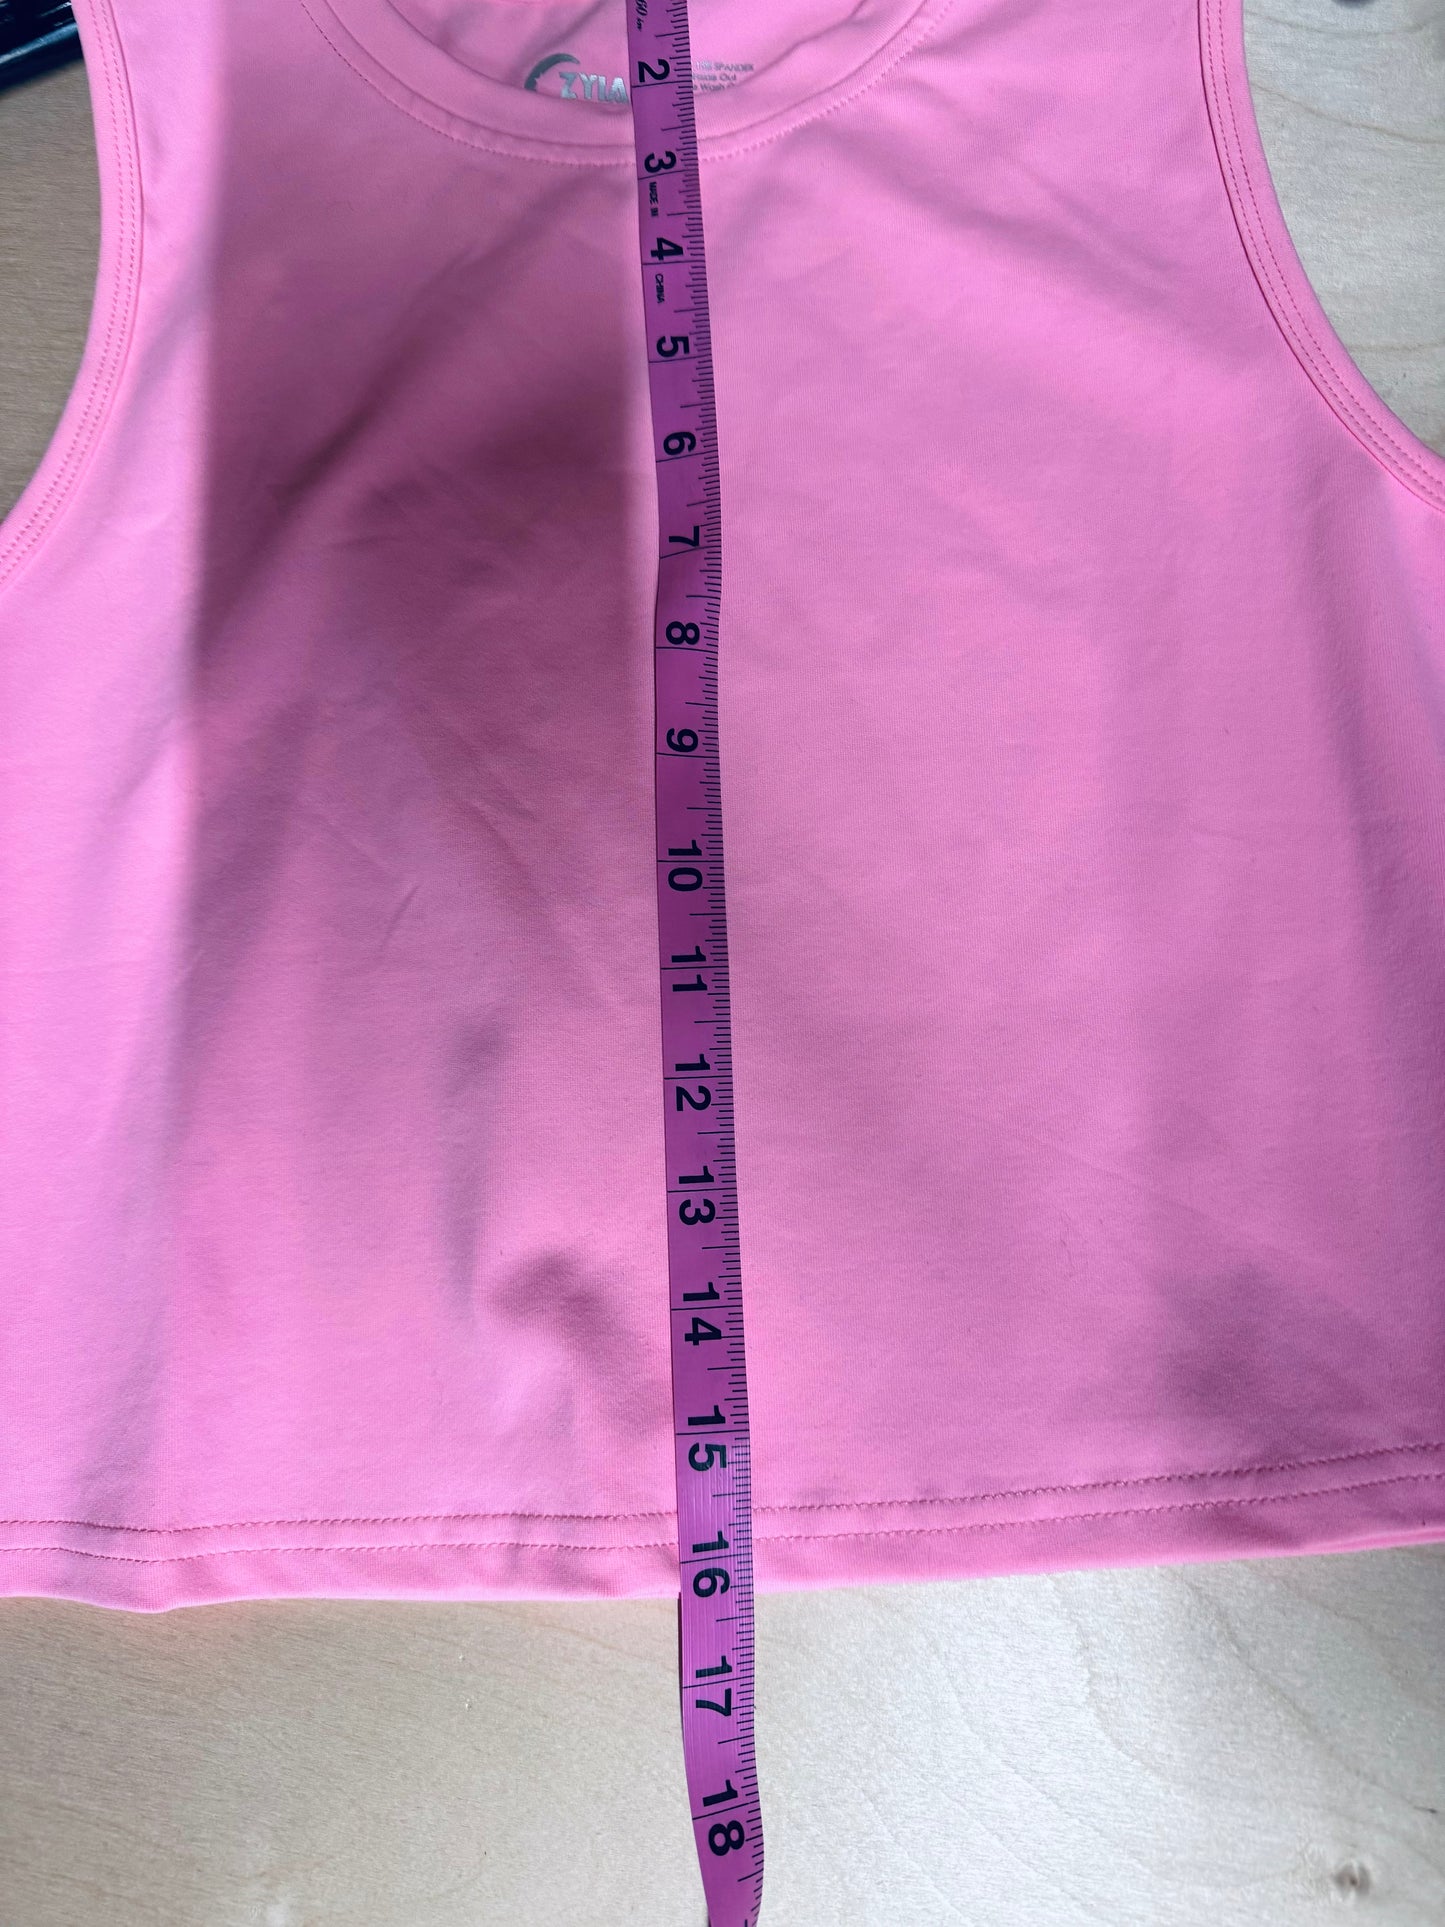 Zyia Active Women’s Sleeveless Shirt Sports Stretchable Top Pink - Size XL